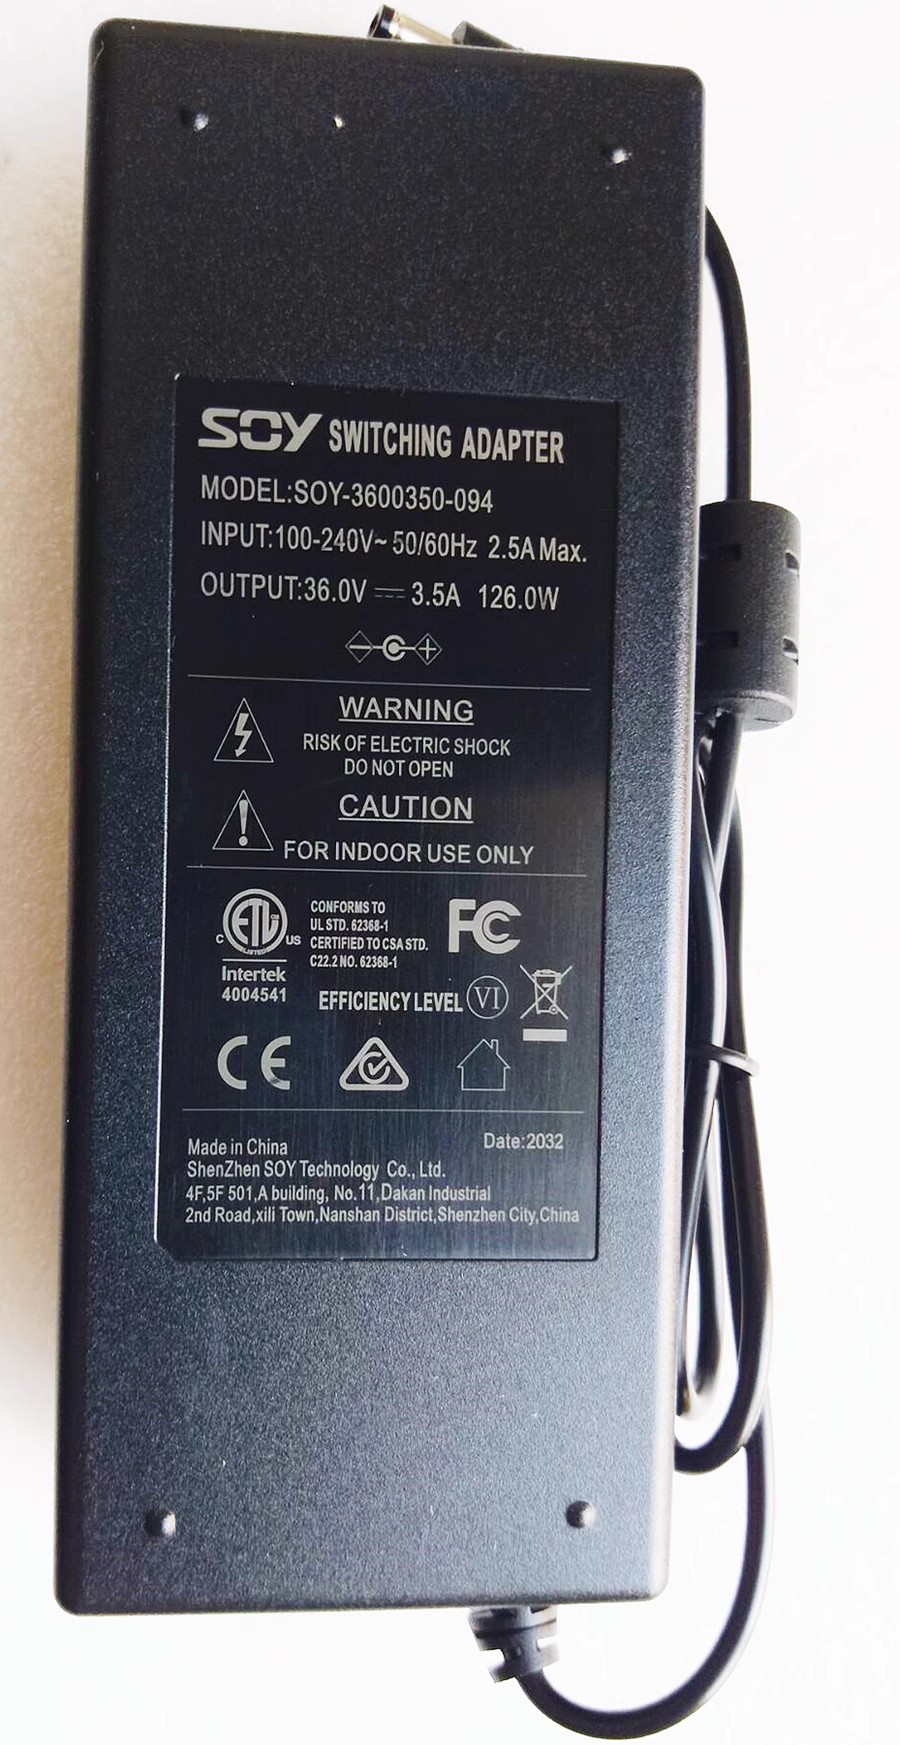 *Brand NEW*Borti BT-WRD-3000 SOY SOY-3600350-094 36V 3.5A AC ADAPTER Power Supply